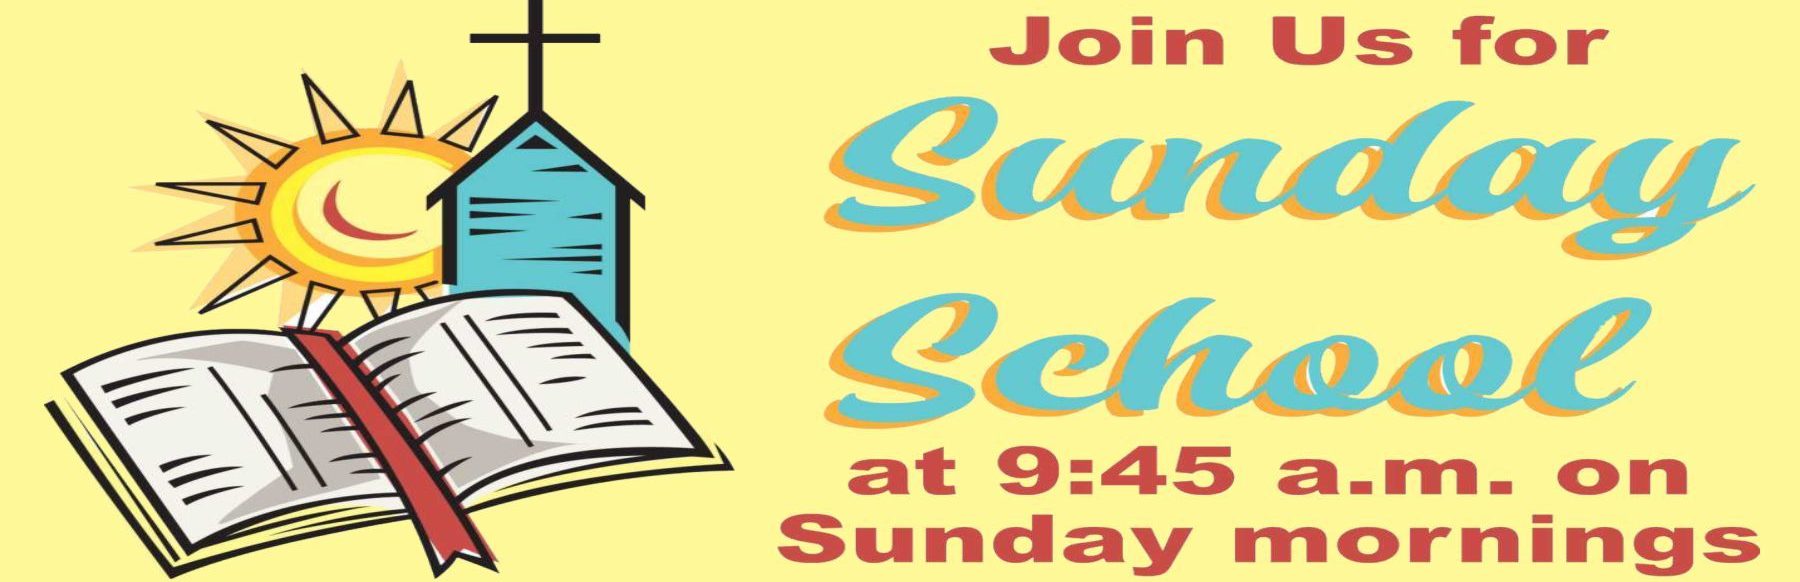 Join Us This Sunday